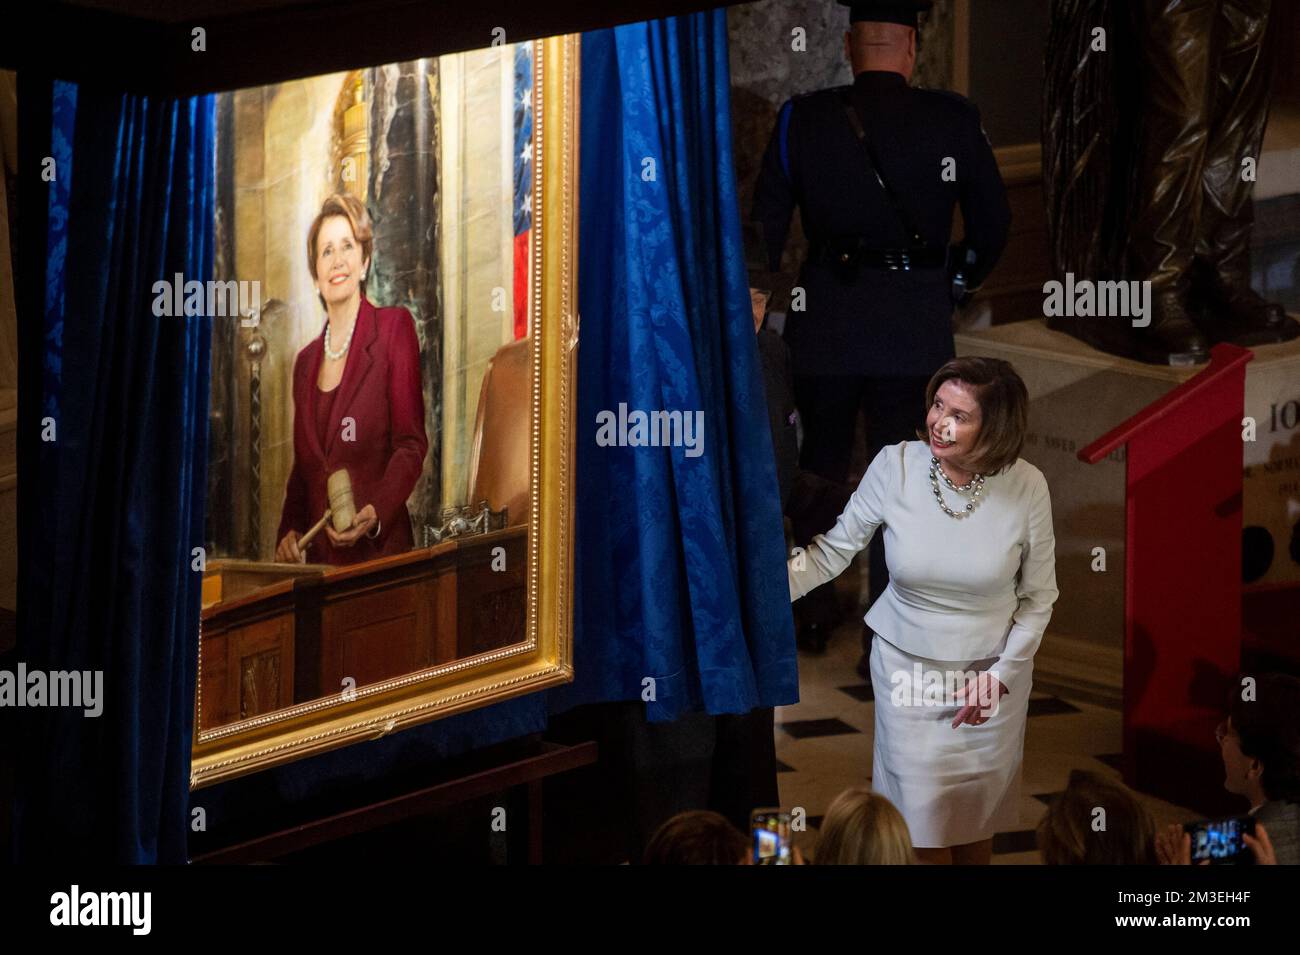 Speaker of the United States House of Representatives Nancy Pelosi (Democrat of California) is joined by her husband Paul Pelosi as she draws back the curtain to unveil her official portrait in Statuary Hall at the US Capitol in Washington, DC, USA, Wednesday, December 14, 2022. Photo by Rod Lamkey/CNP/ABACAPRESS.COM Stock Photo